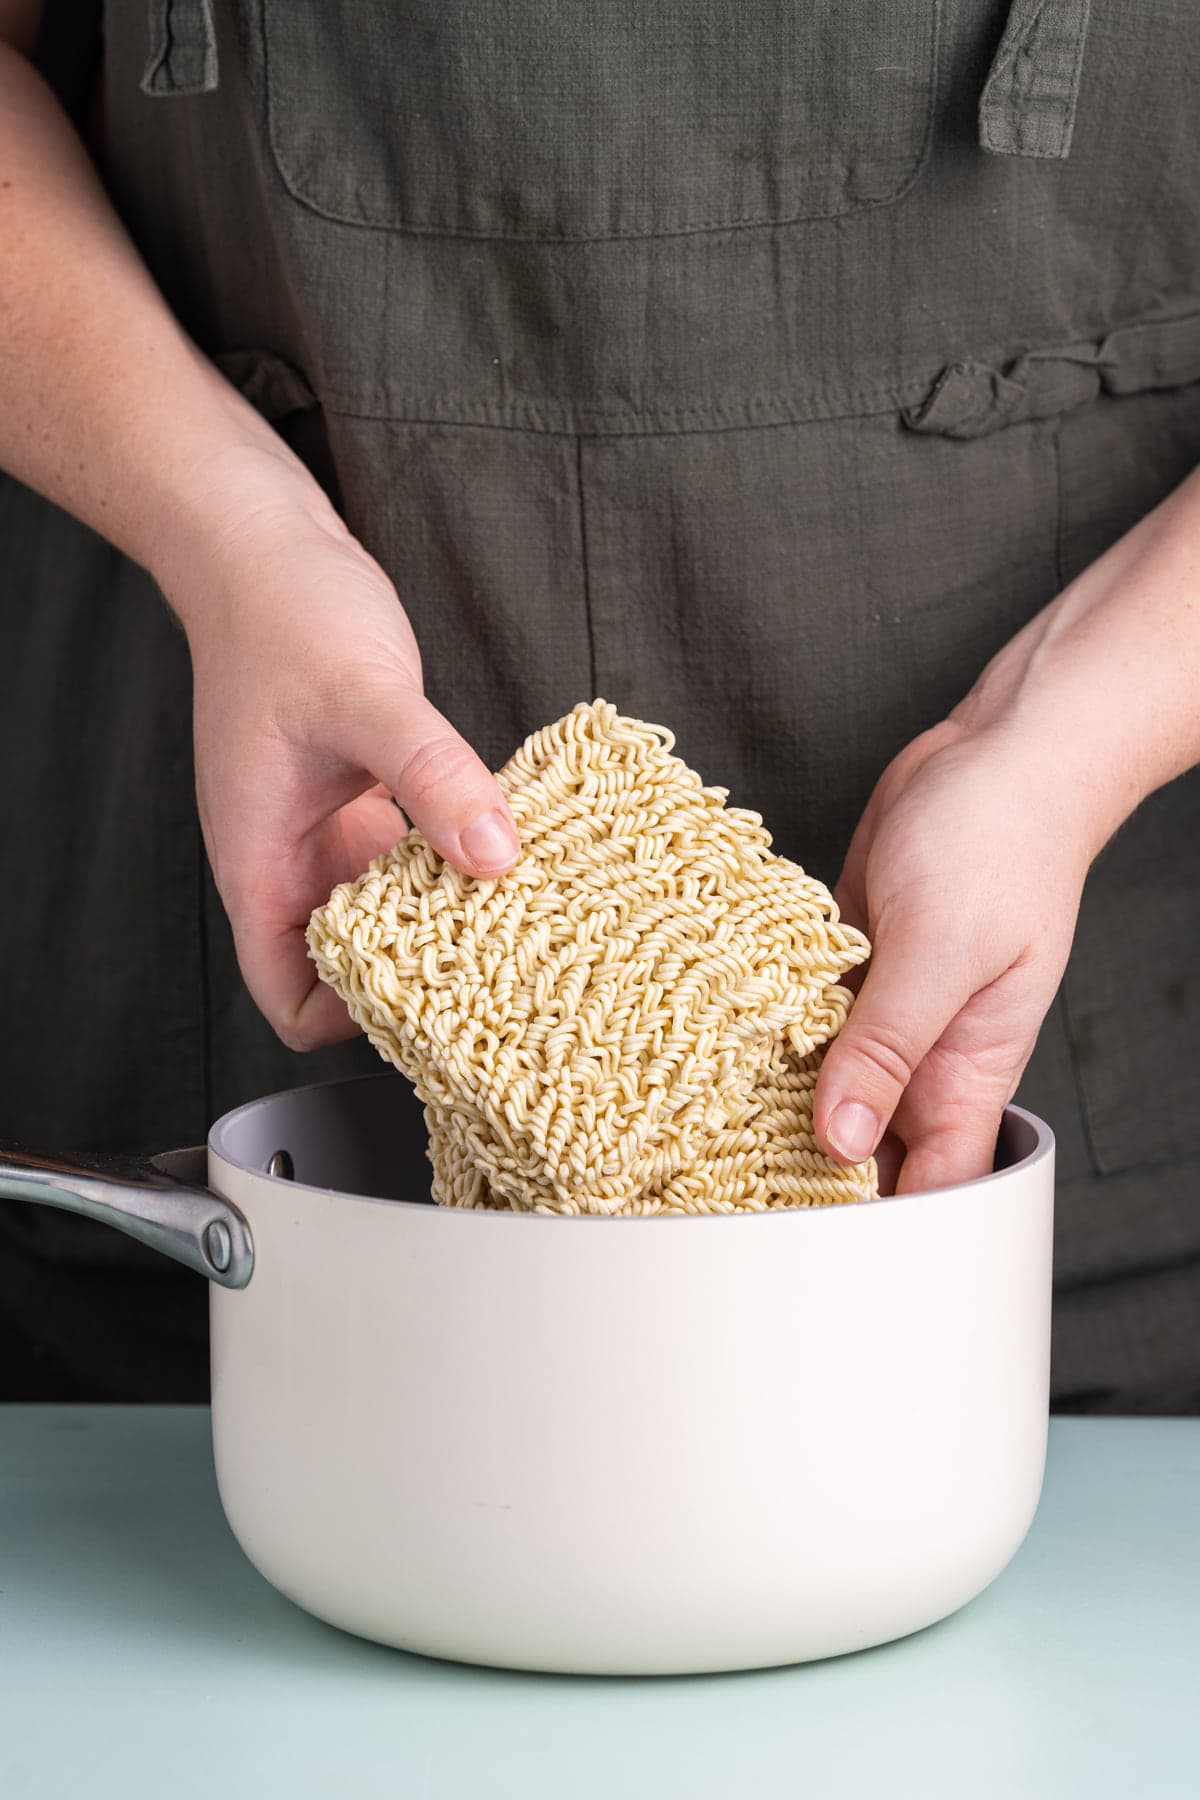 Adding ramen noodles to boiling water